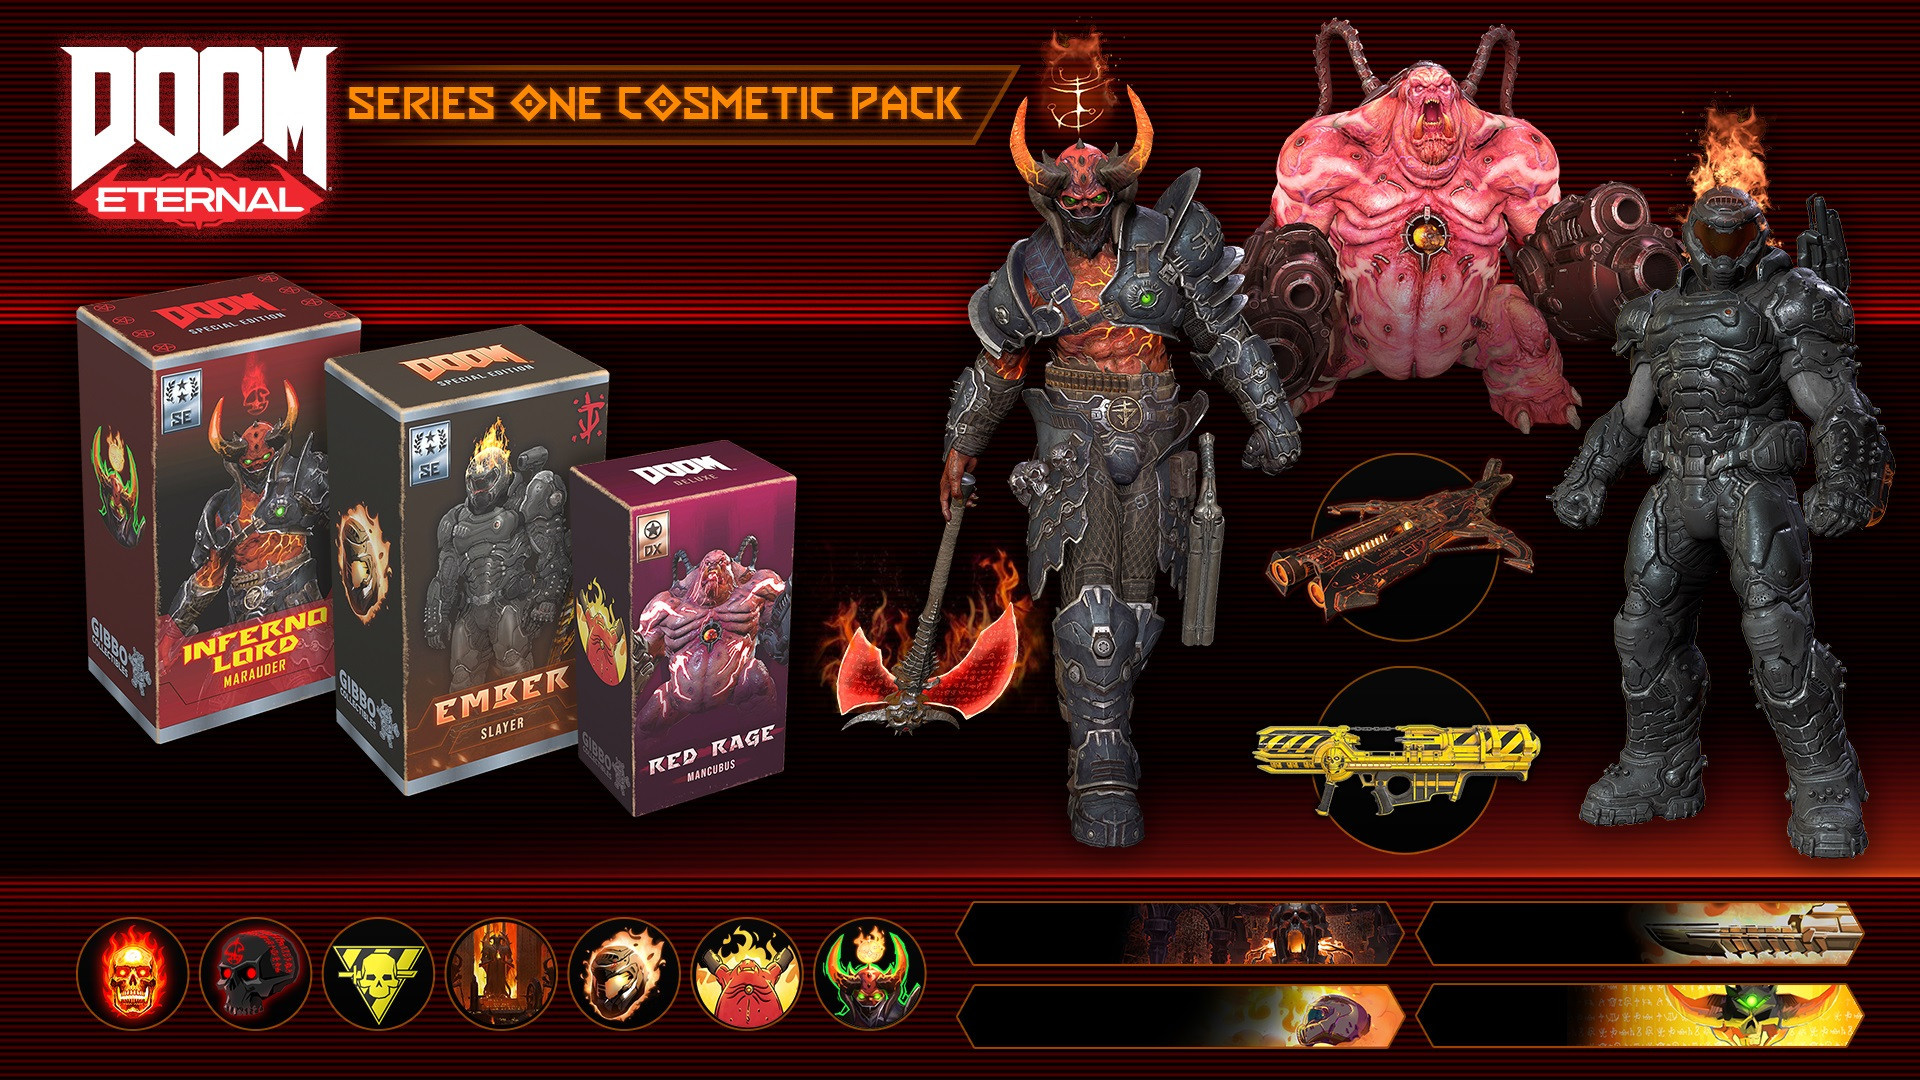 AOC DOOM Eternal: Series One Cosmetic Pack DLC (extra content)